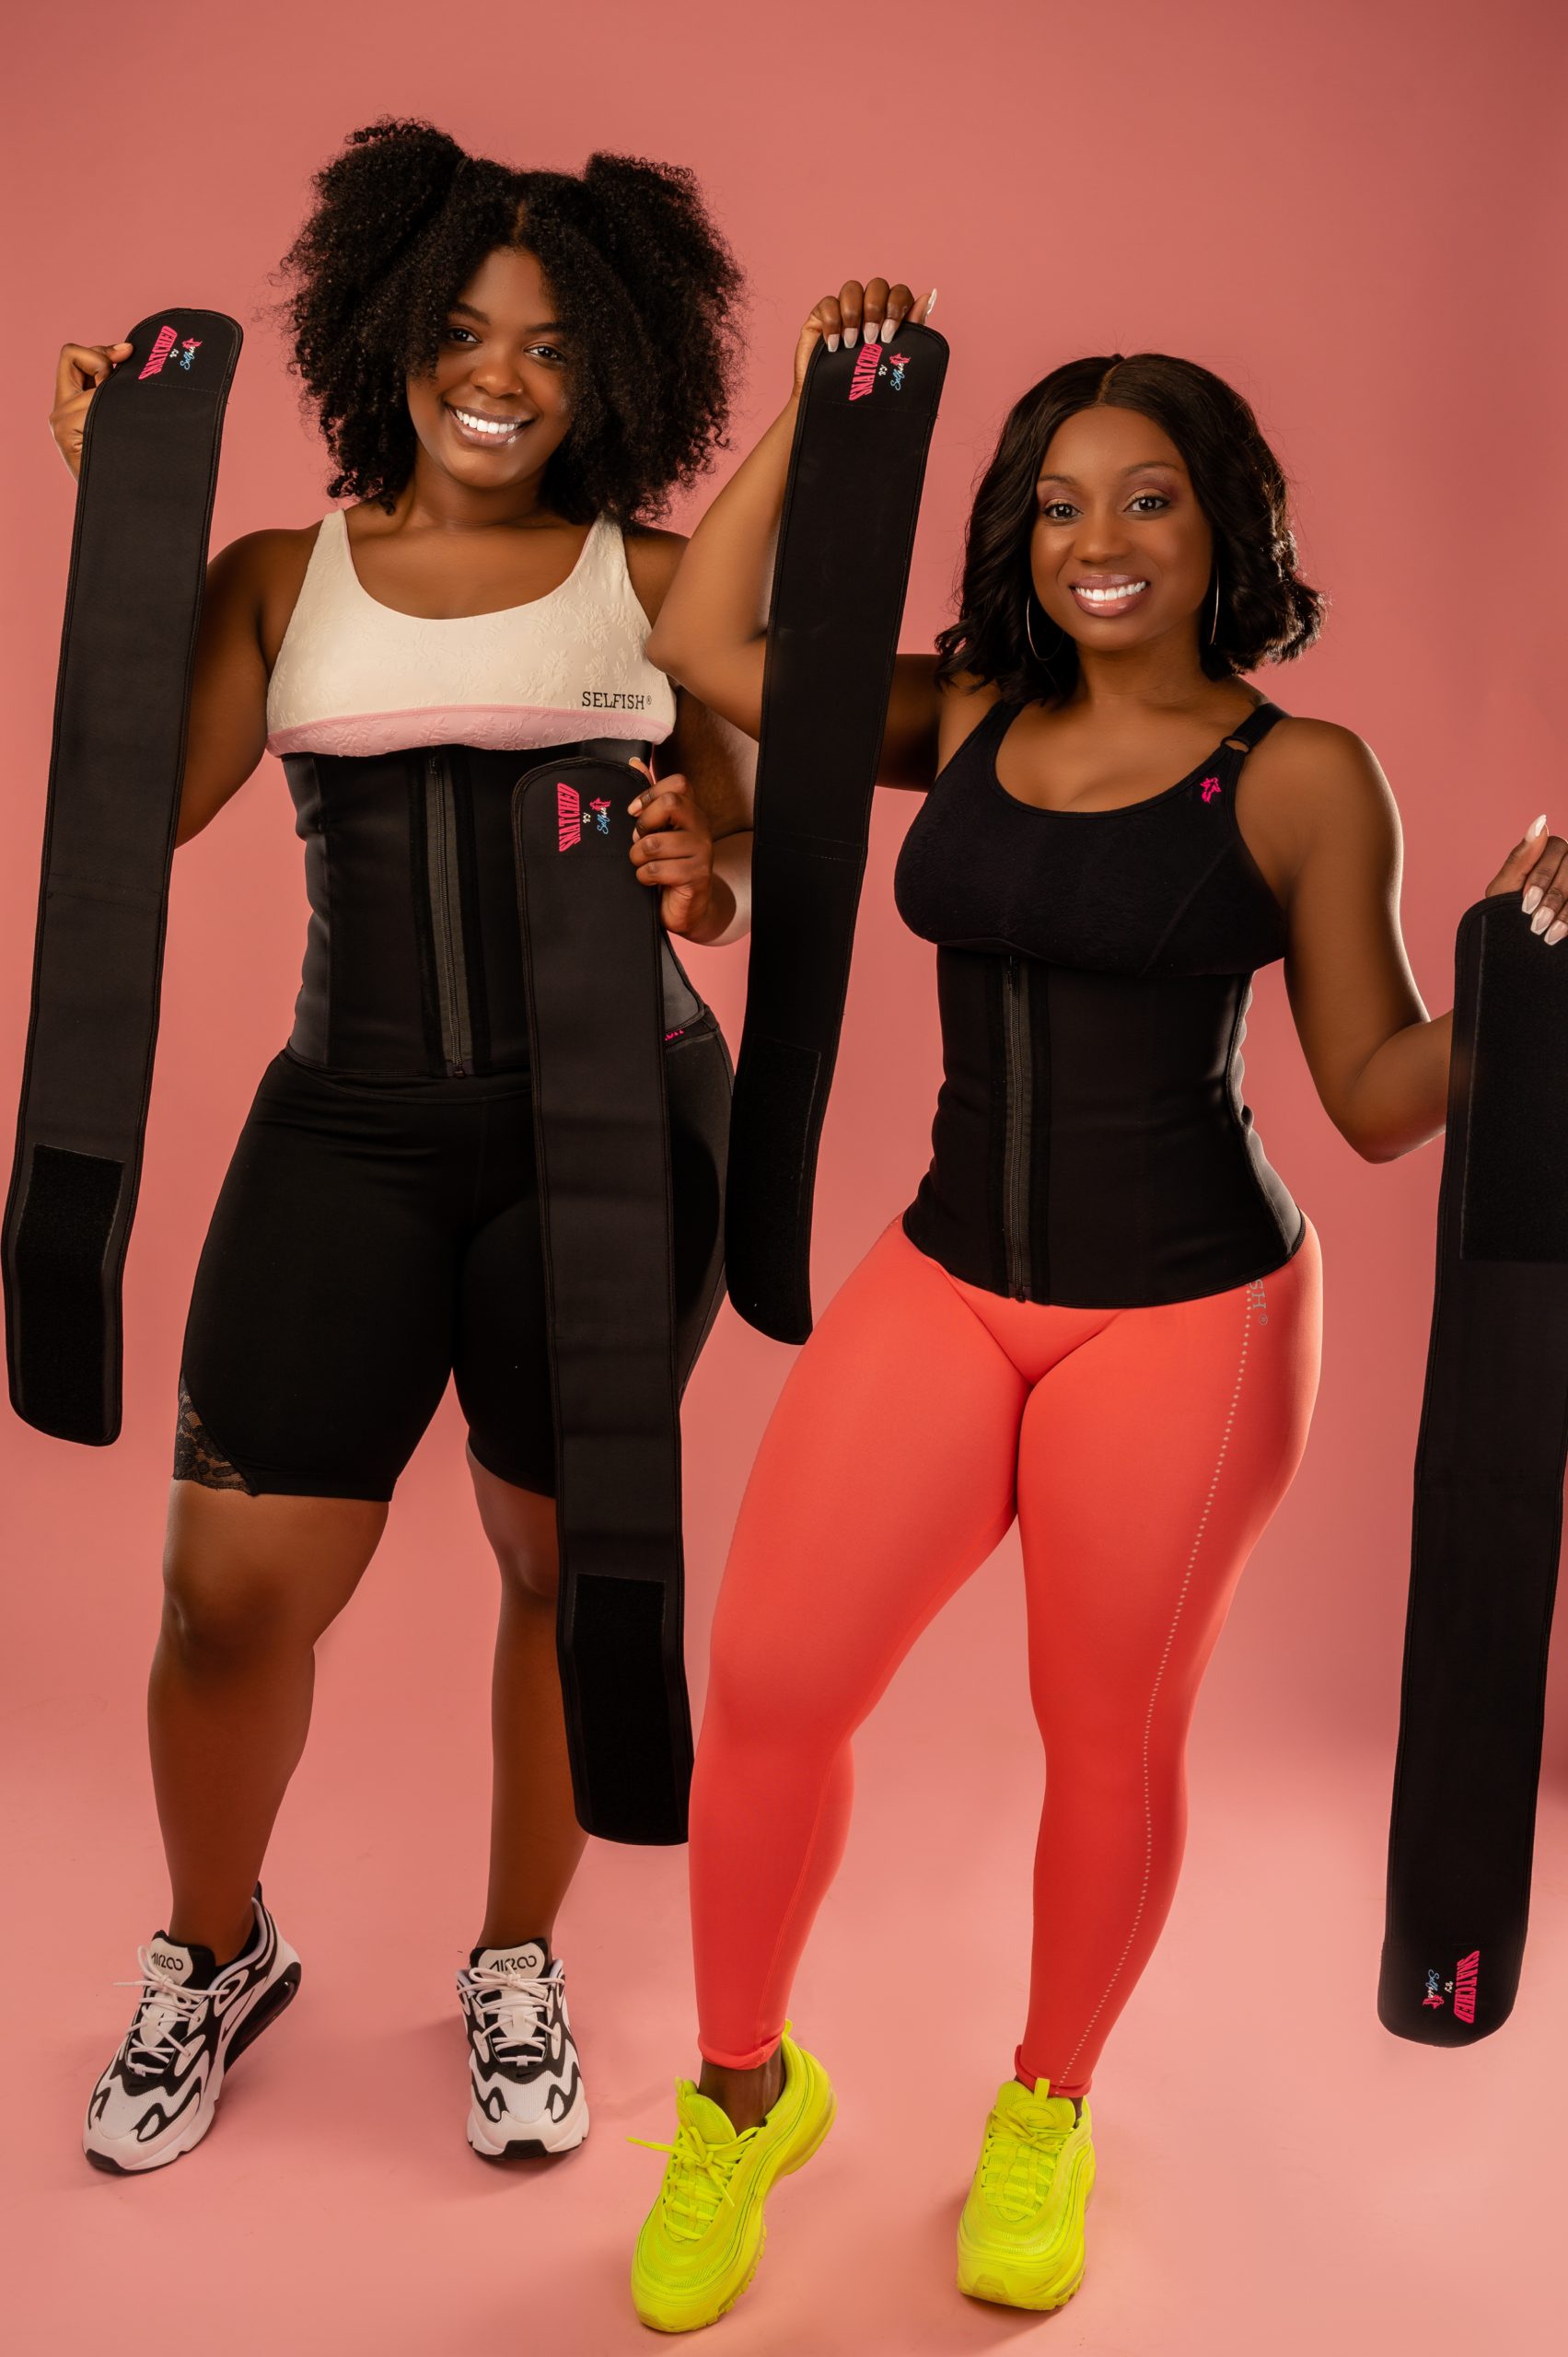 If you desire to have a snatched waist, Berbie Beauty waist snatcher is all  you need ‼️ Helps you achieve that super sexy waistline a